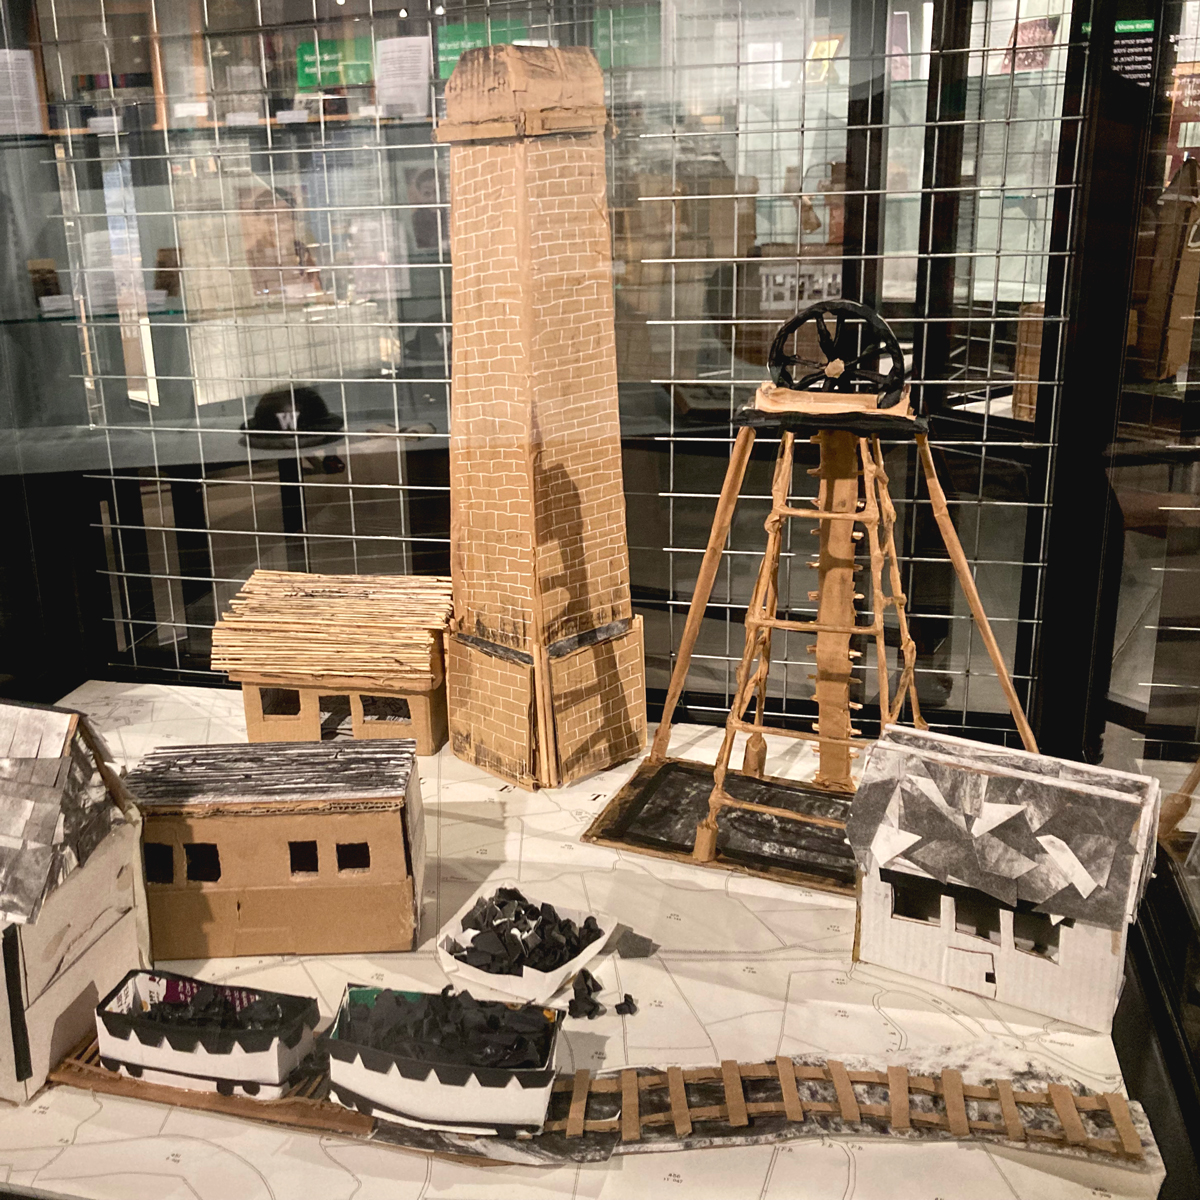 Exhibition Colliery Buildings made from cardboard.